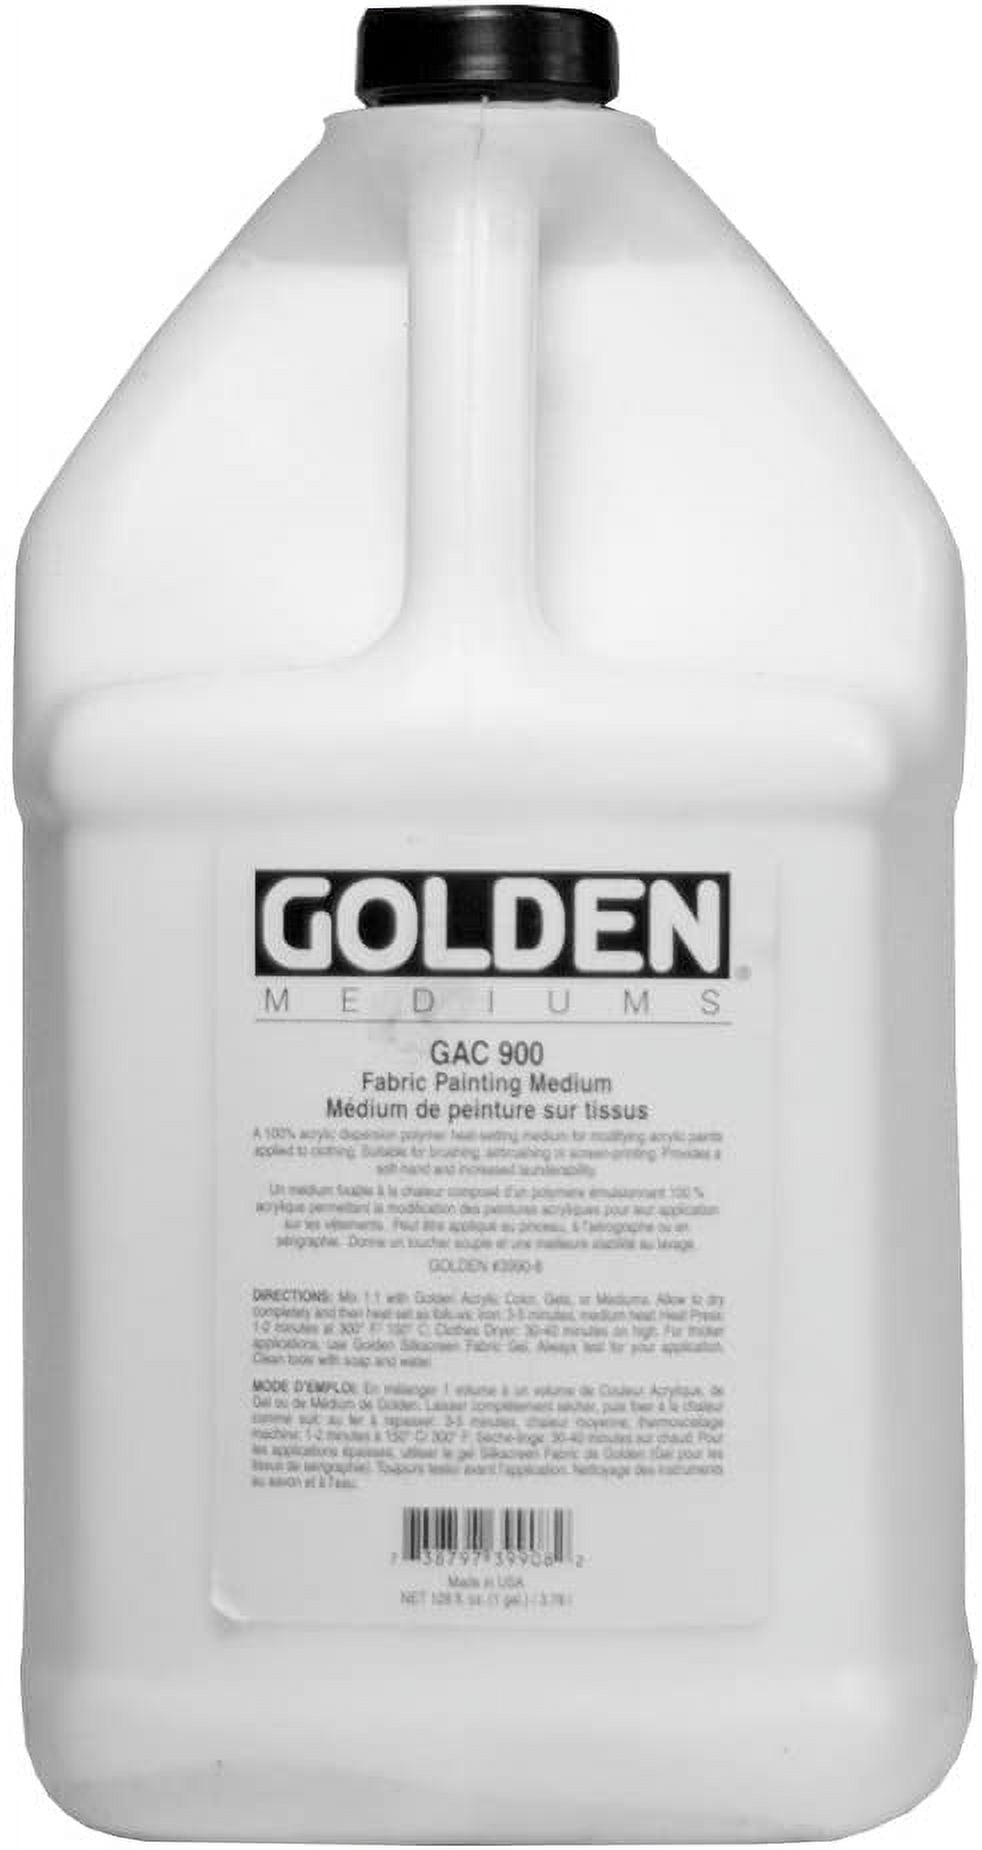 Having issues with printing on fabrics while using Golden GAC 900. Should I  switch to Speedball fabric inks? : r/SCREENPRINTING